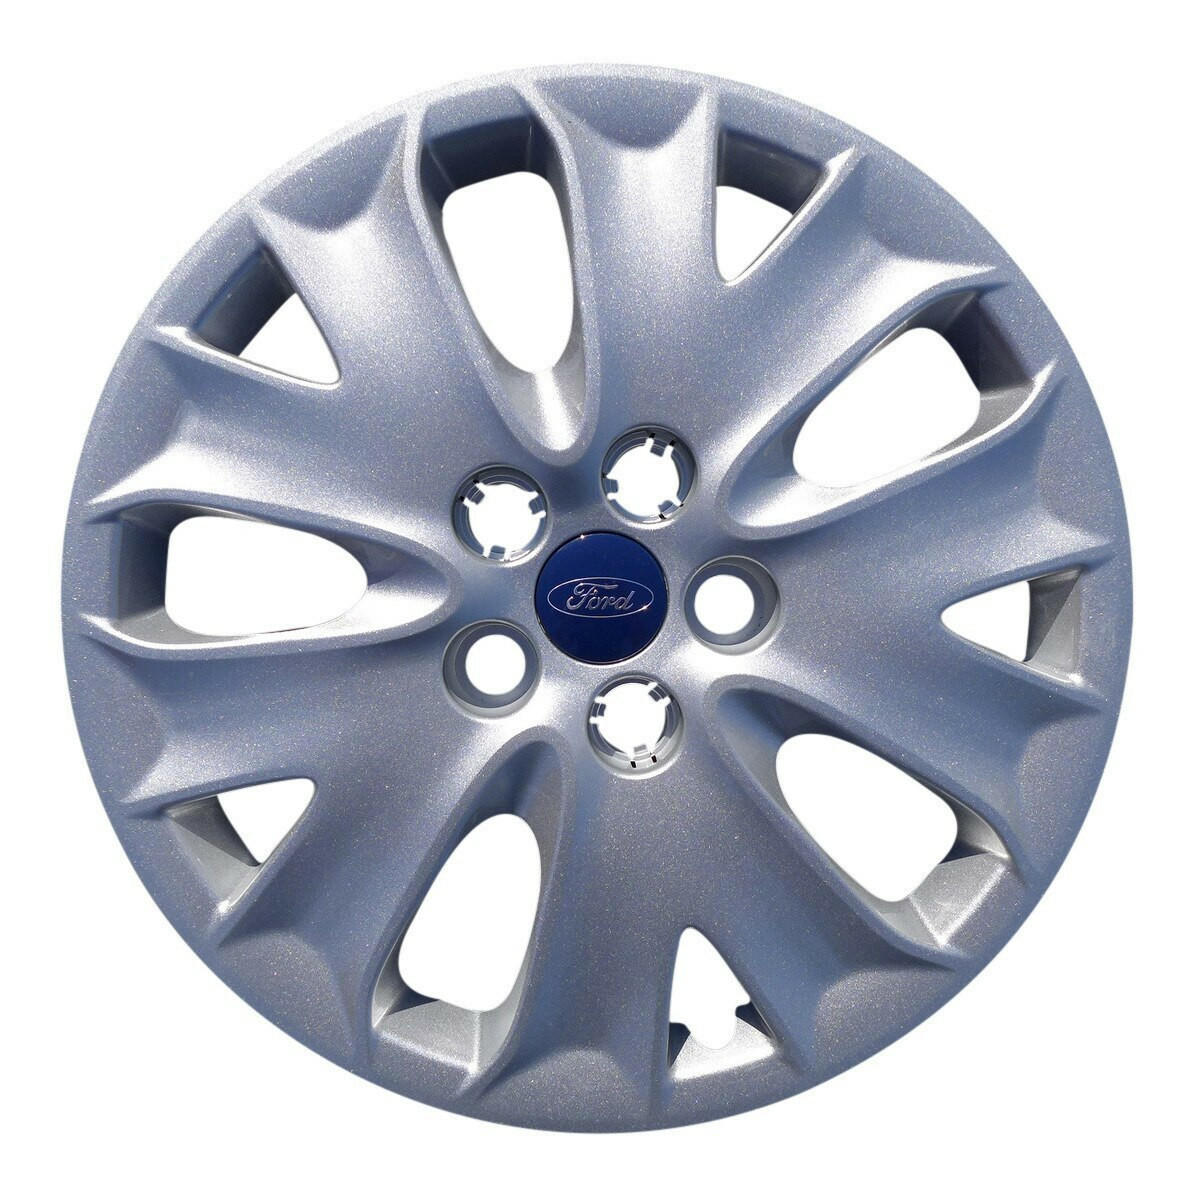 Smart Buys! 2013 2014 Ford Fusion Hubcap / Wheel Cover 16' 7063 starting from $44.95 at wheelcovers.com/original-hubca… See more. 🤓 #like4like #tagsforlikes